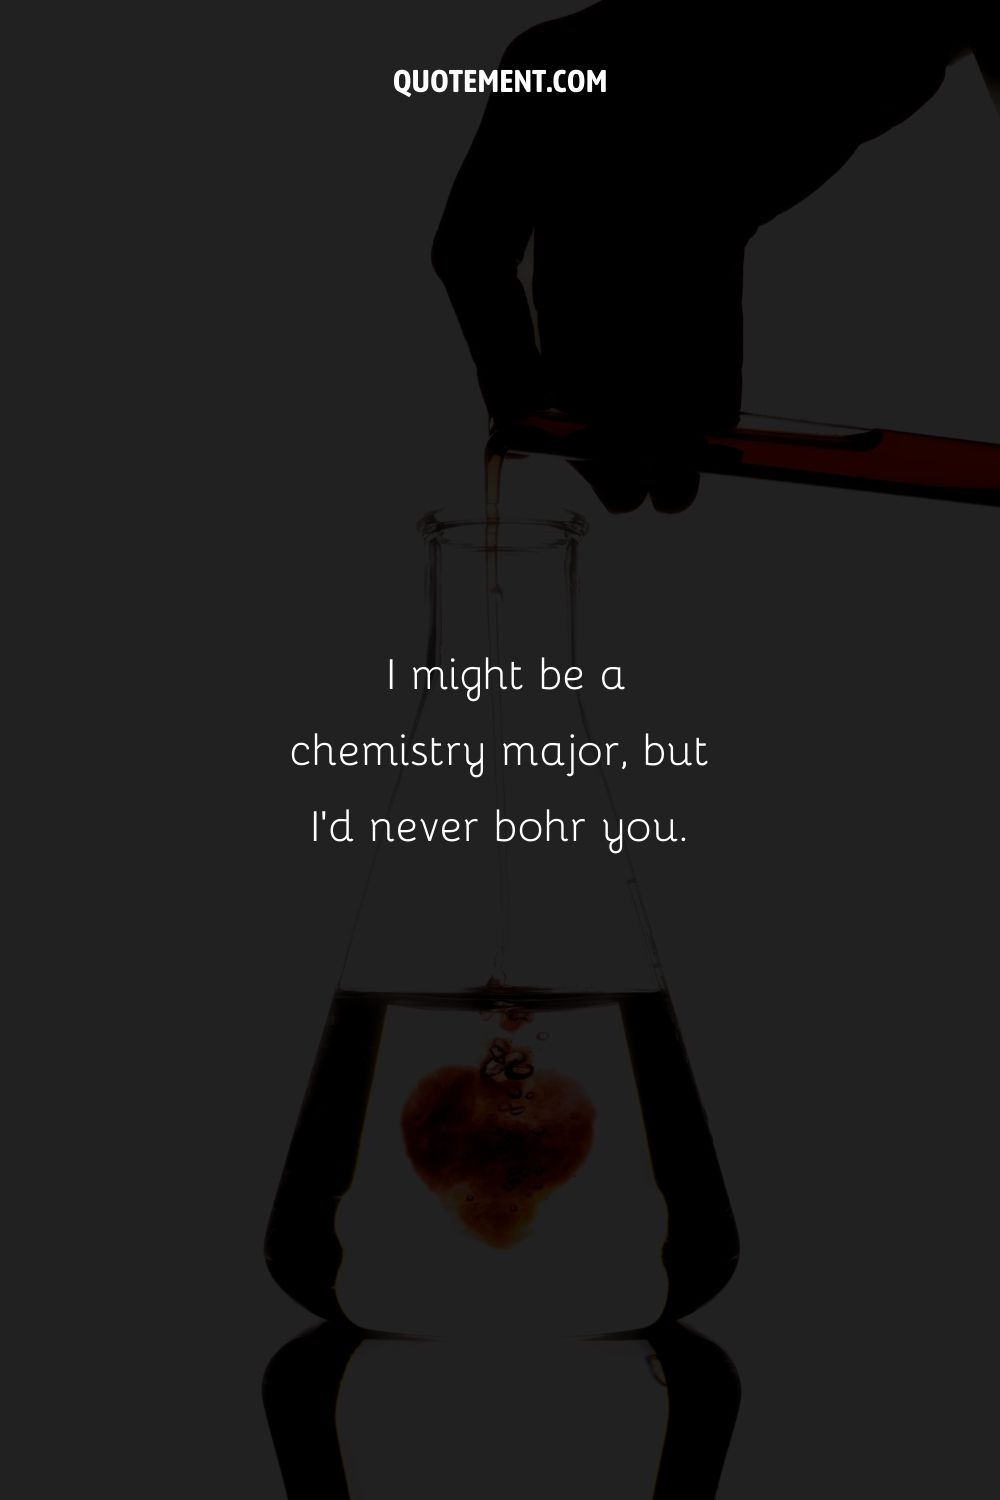 Awesome pick up line related to chemistry represented by a chemist pouring liquid from the pipette into a conical flask